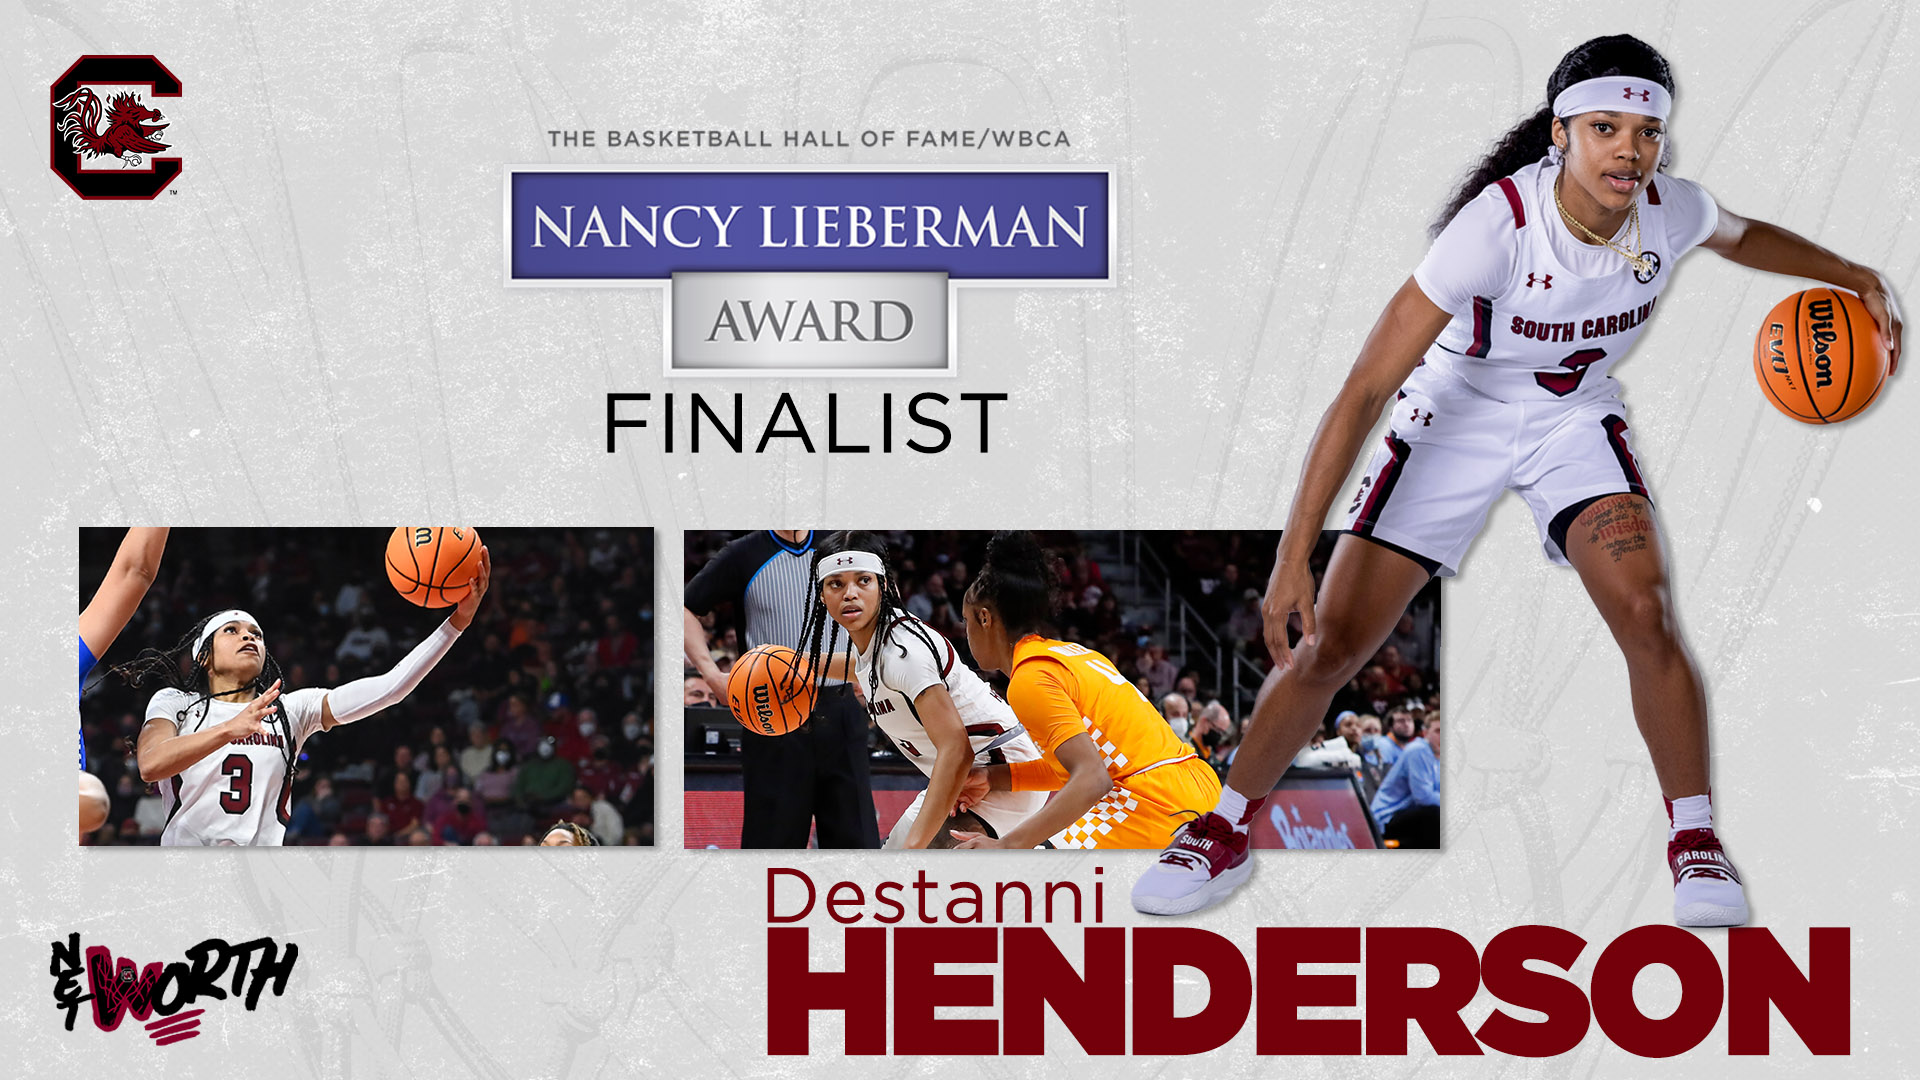 Henderson Named Finalist for Point Guard Award